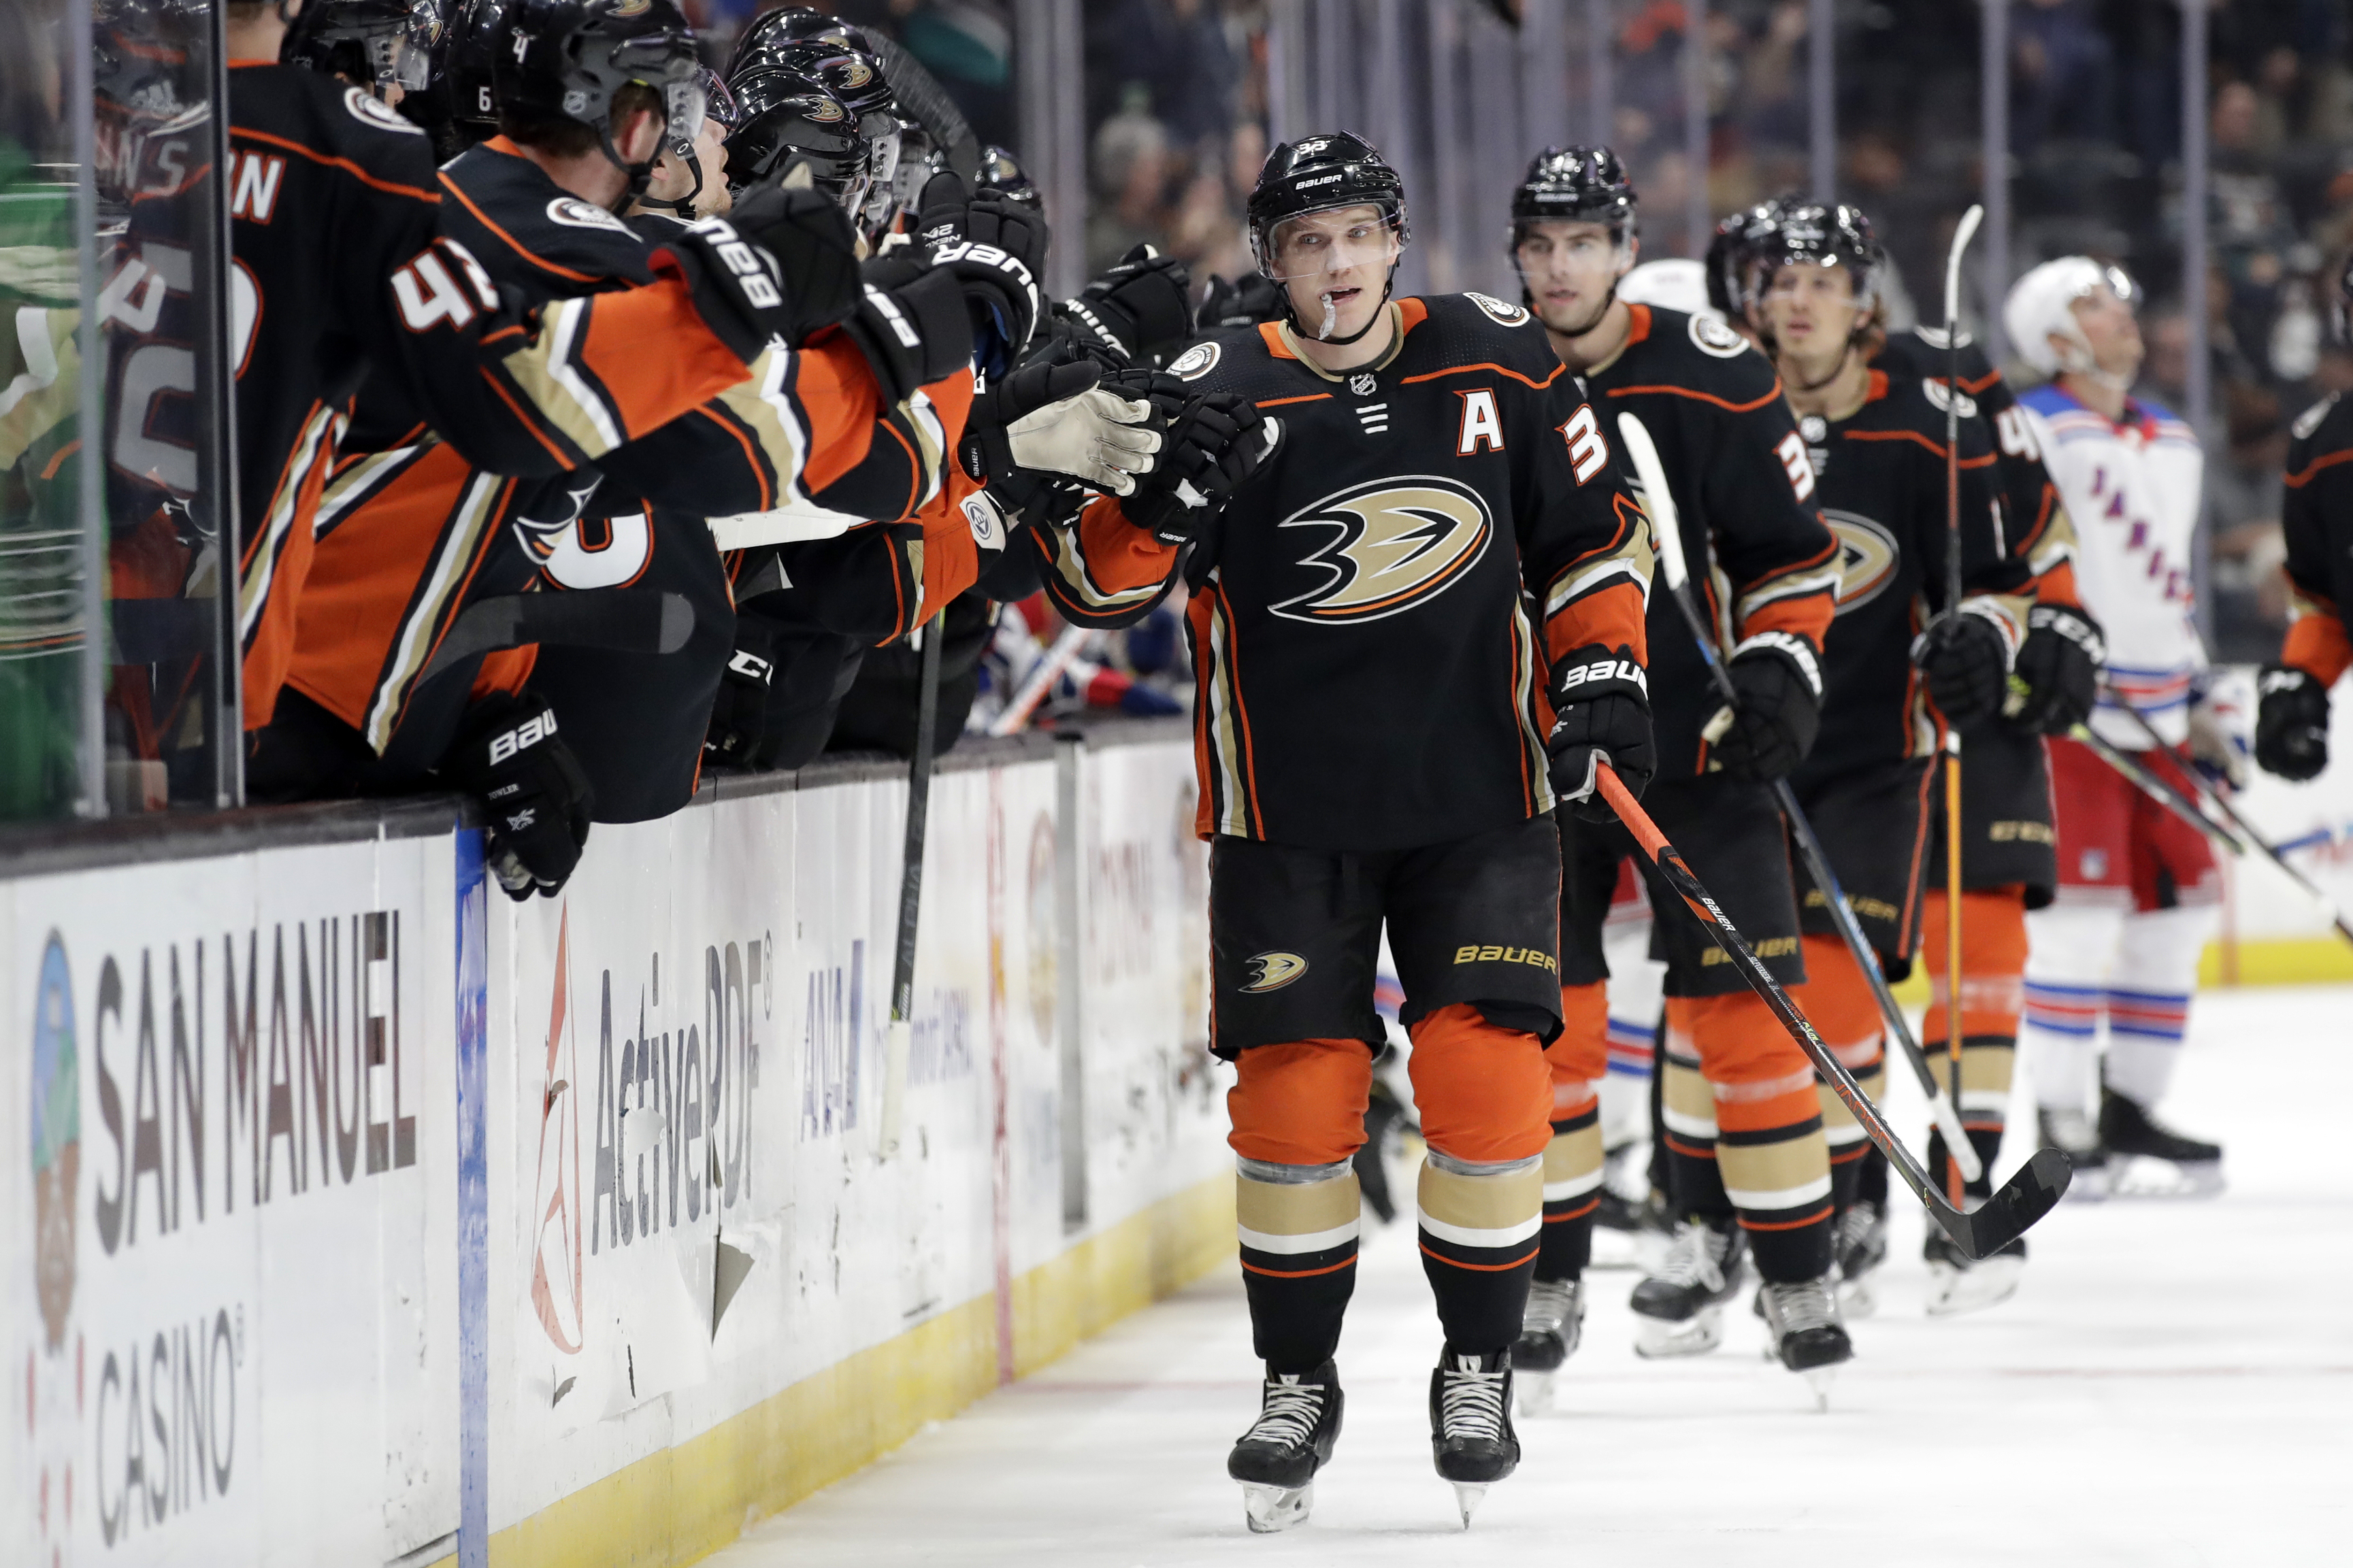 Ducks beat Rangers in shootout after Lindholm ties it late